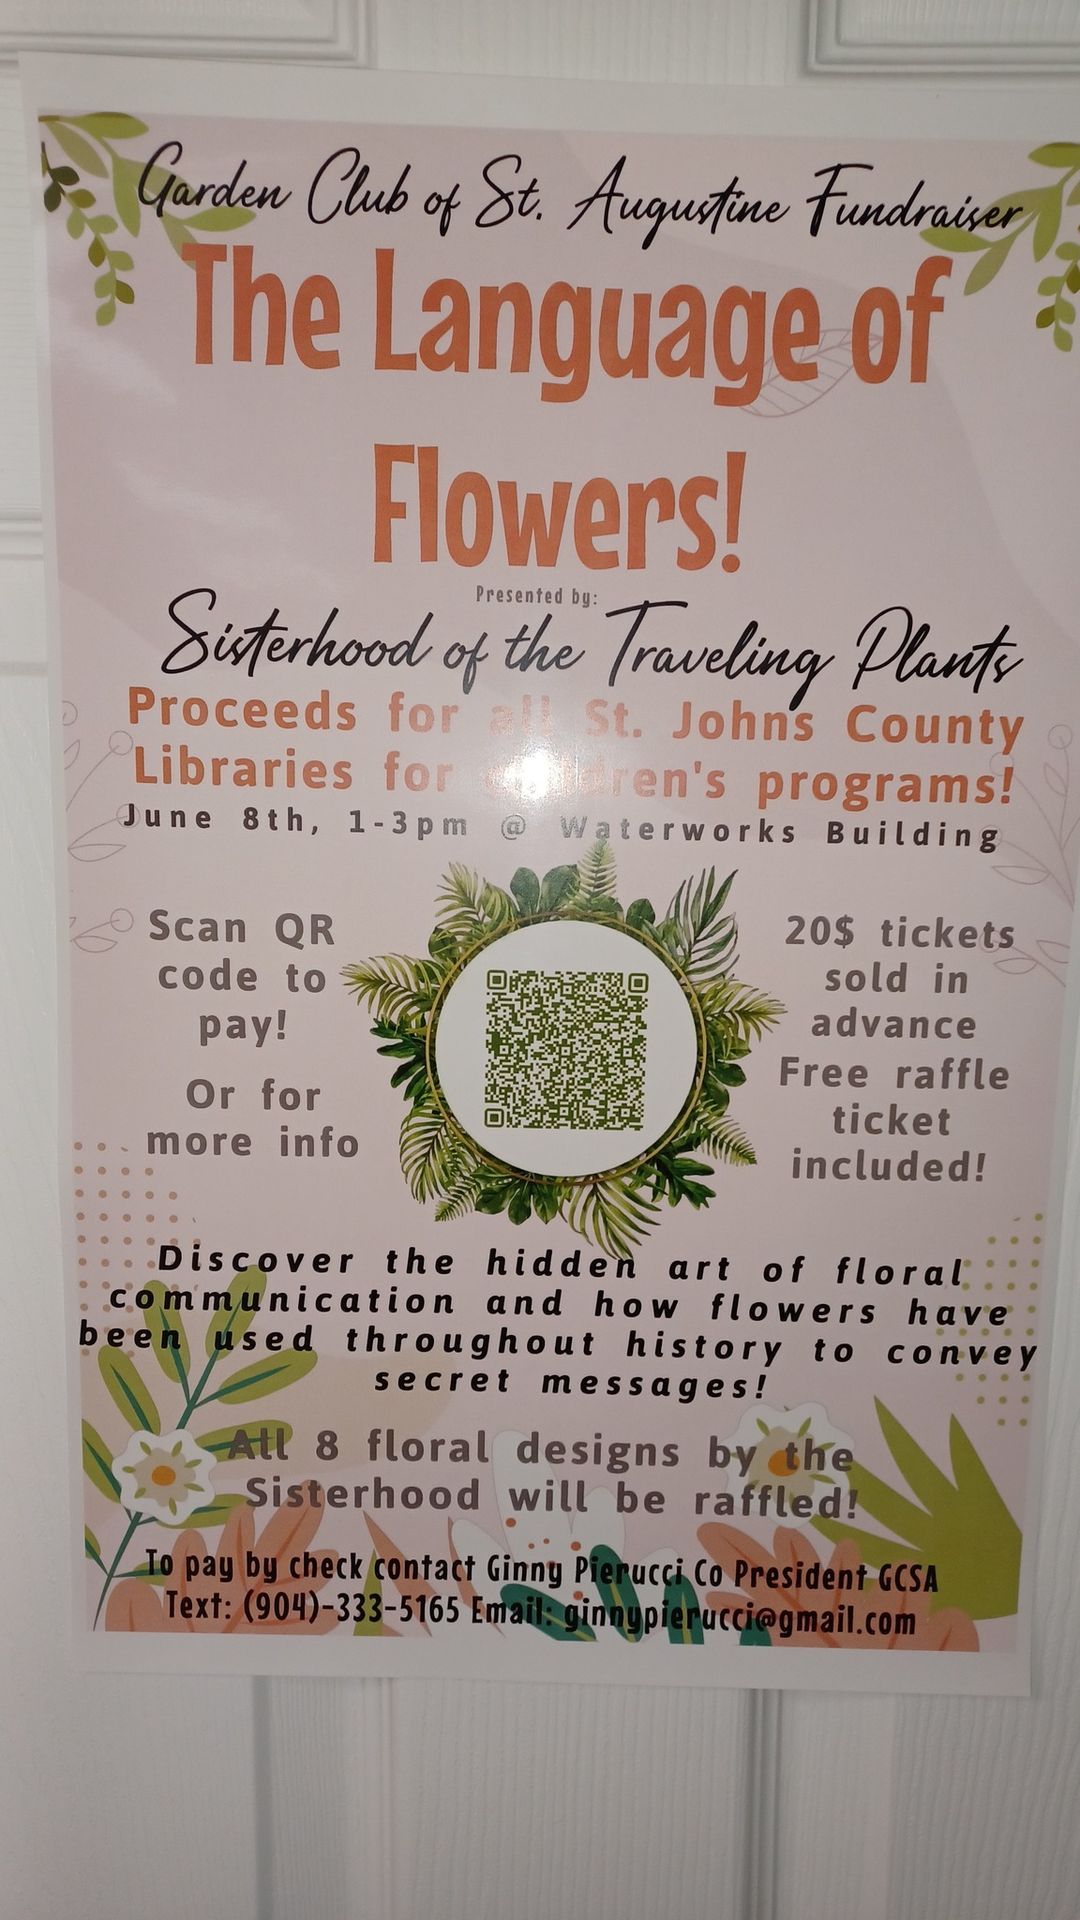 THE LANGUAGE OF FLOWERS  The Sisterhood of the Traveling Plants presents a Garden Club funraiser